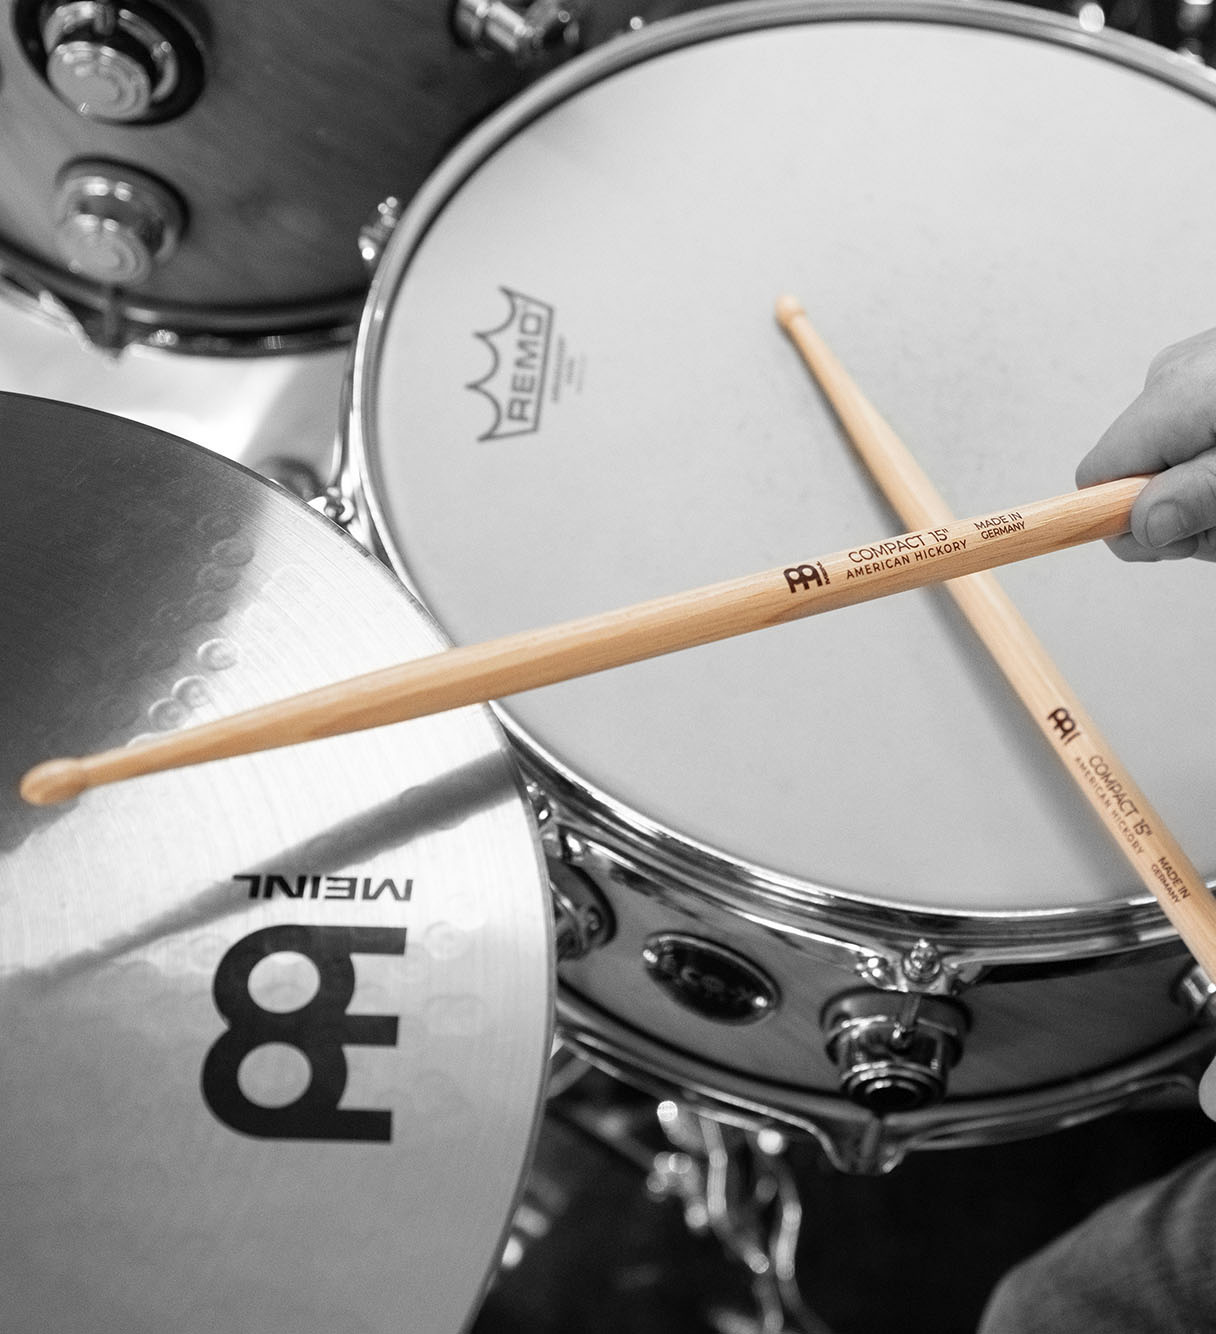 Meinlshop additions – This is new for drummers 2022